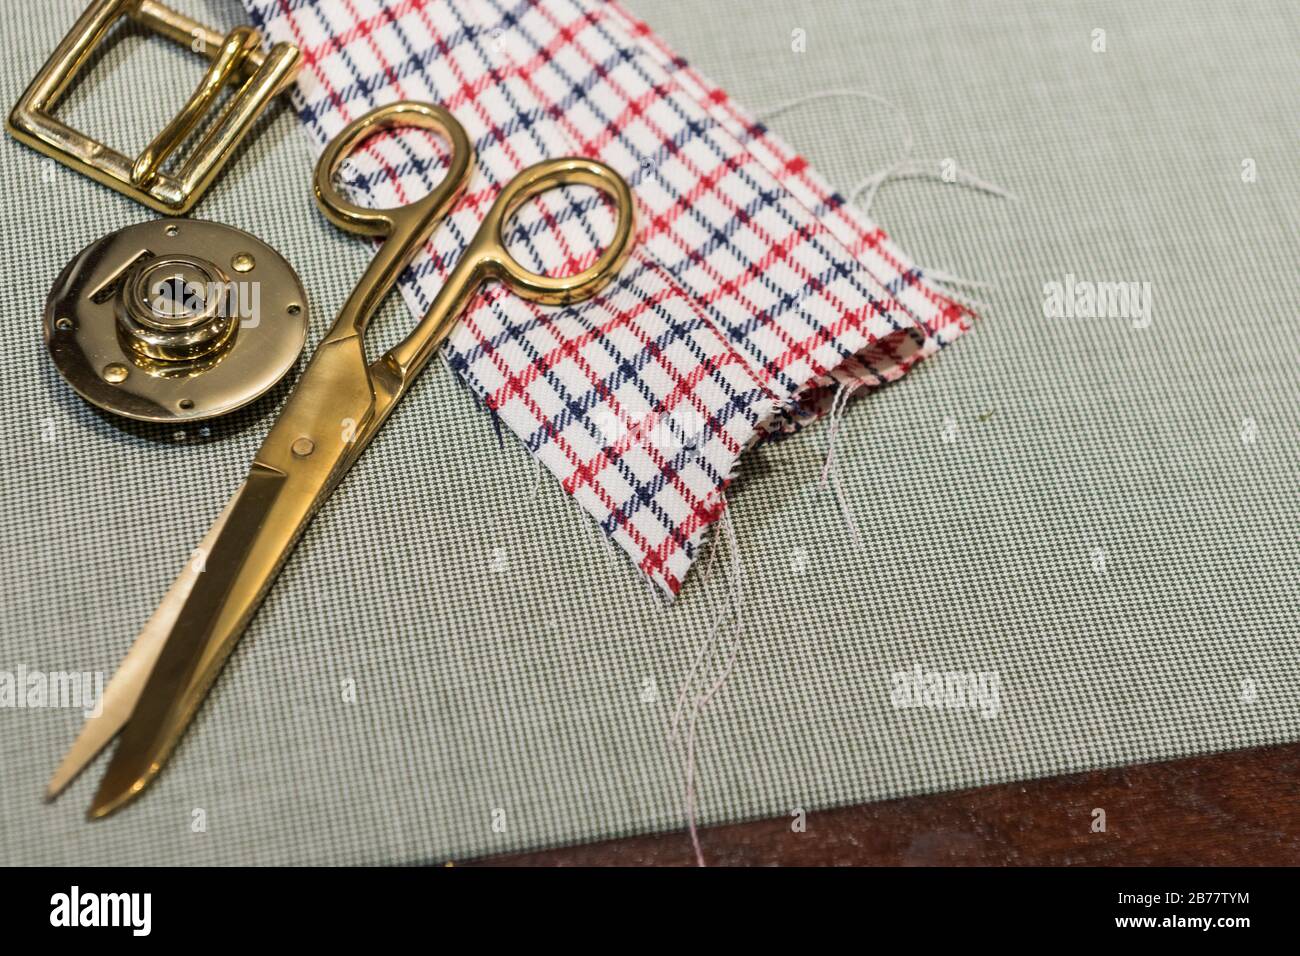 Luggage Maker's' Table - Malletier - With Gold Implements and Checkered Cloth Stock Photo